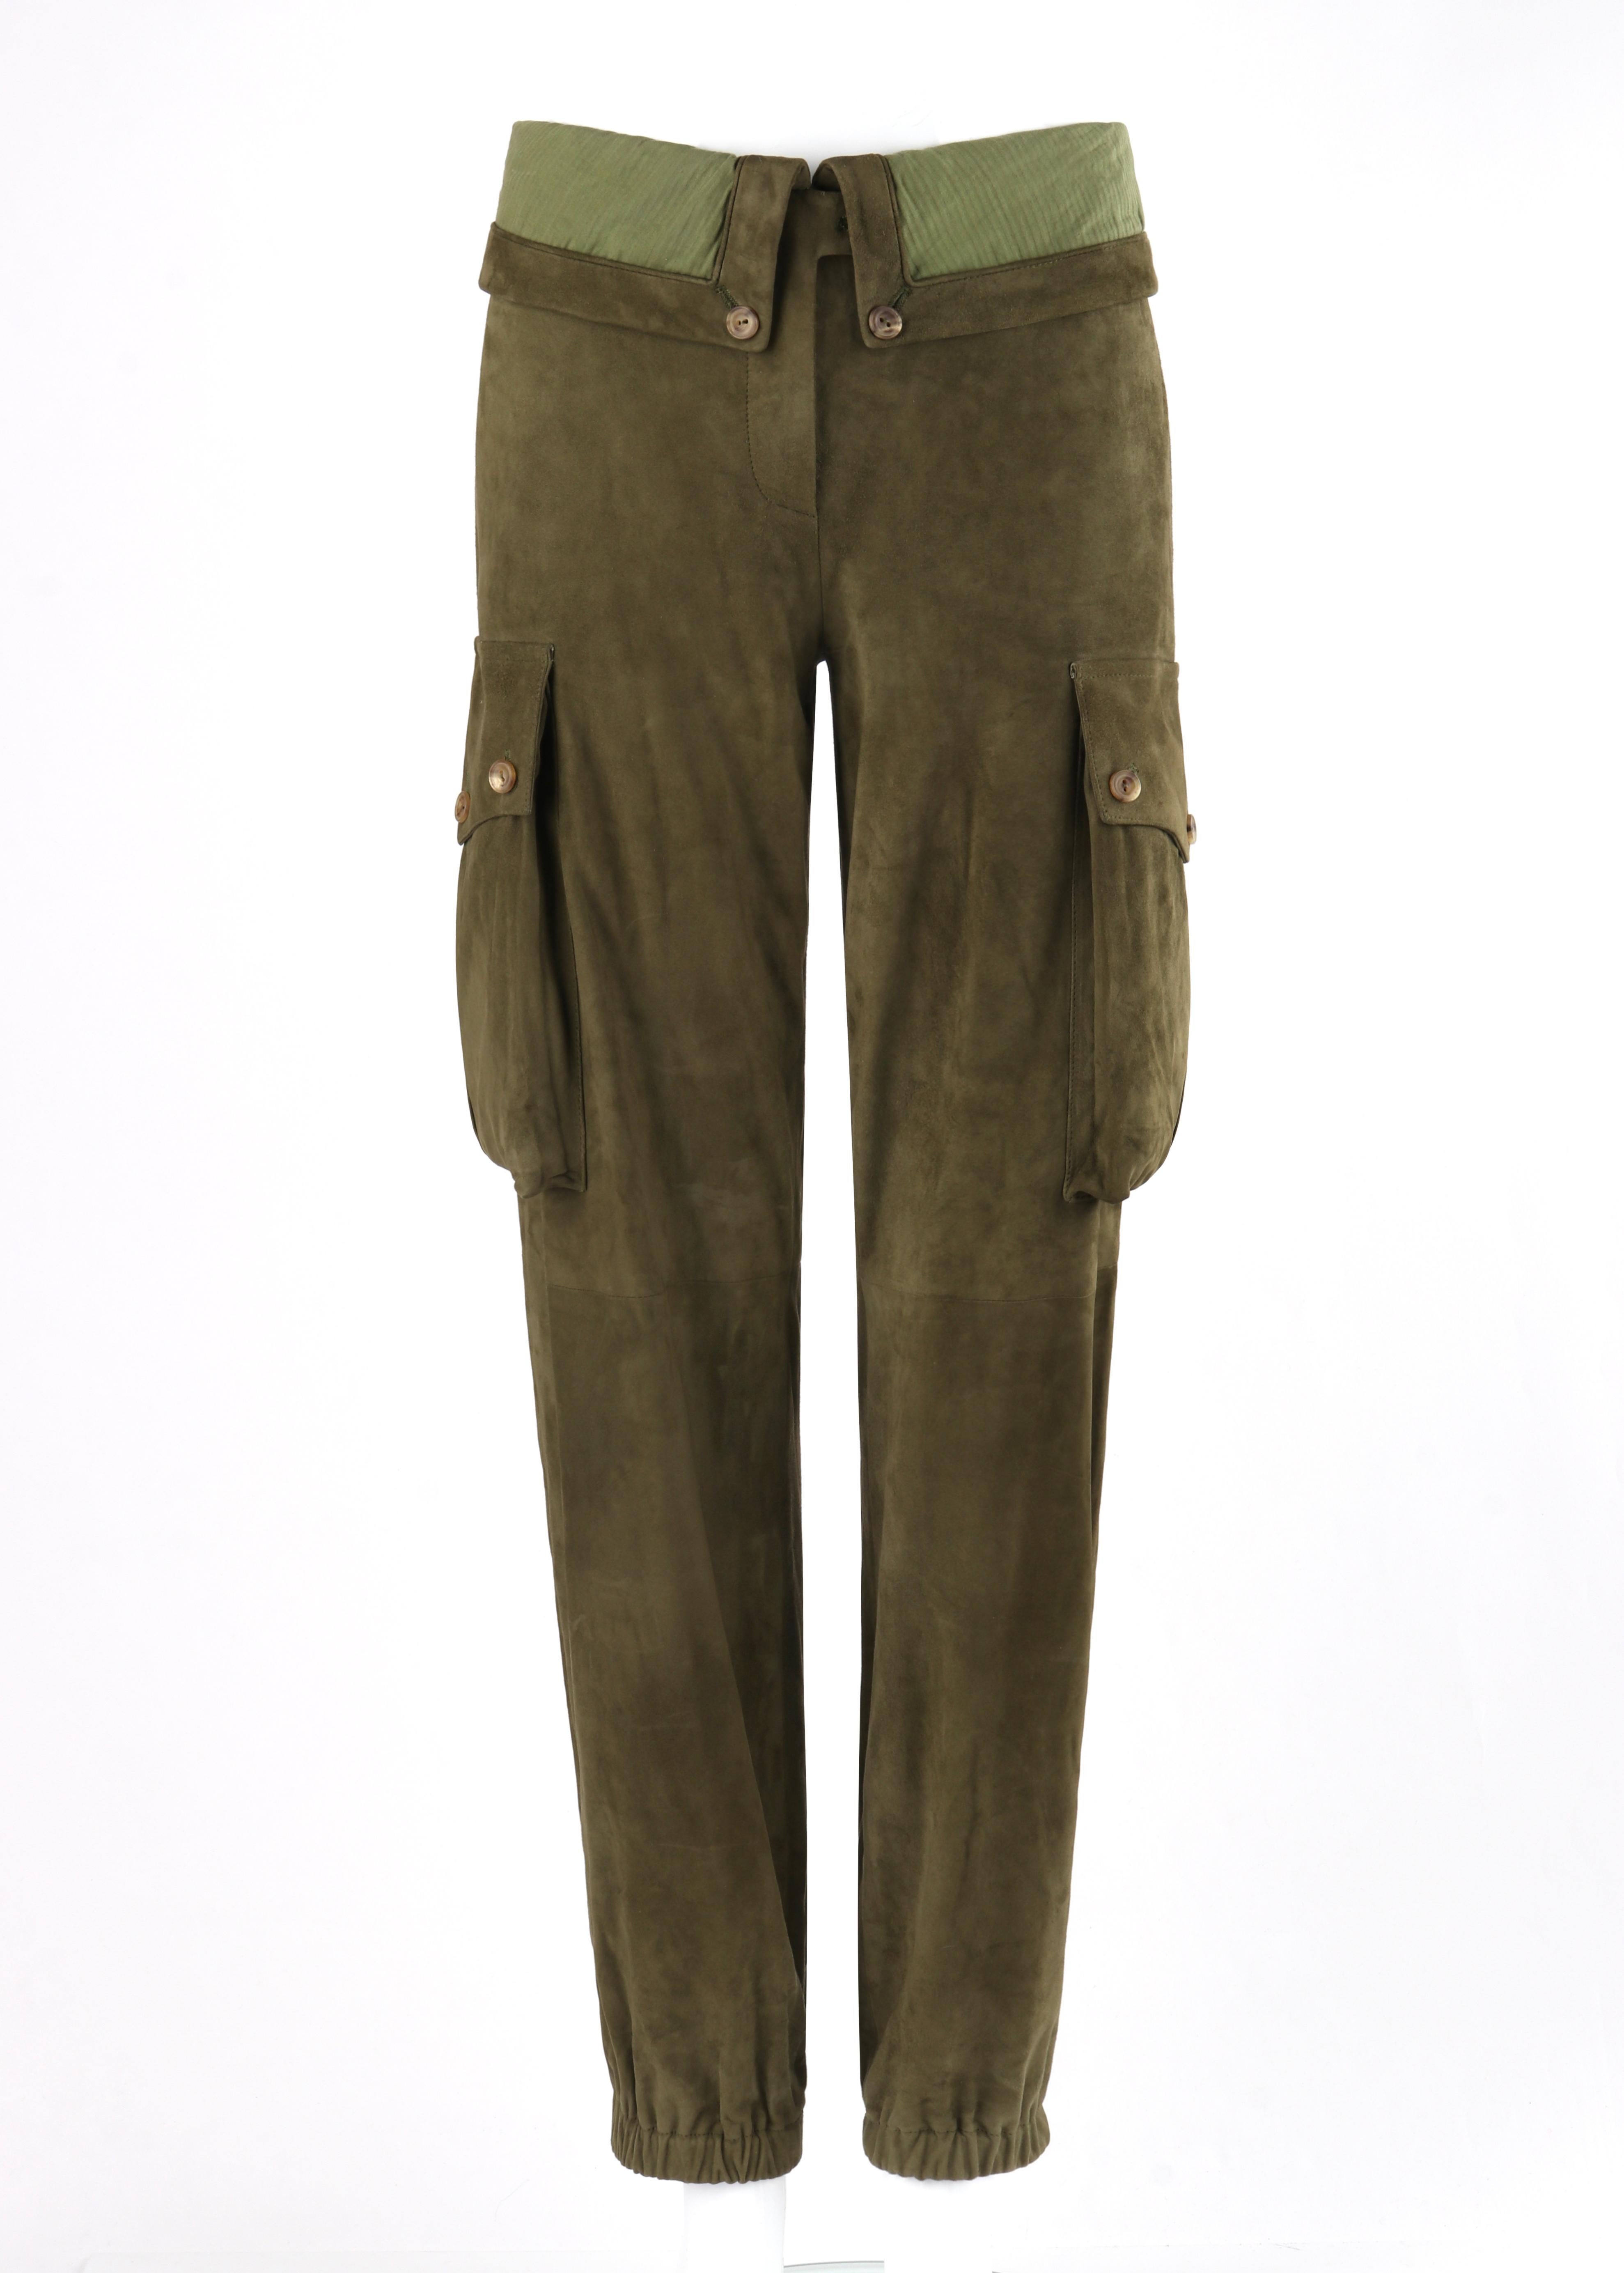 ALEXANDER McQUEEN A/W 2009 Army Green Suede Leather Cargo Pant Fold Over Joggers
 
Brand / Manufacturer: Alexander McQueen
Collection: A/W 2009 
Style: Cargo Joggers
Color(s): Shades of army green
Lined: Yes
Marked Fabric Content: Exterior “100%